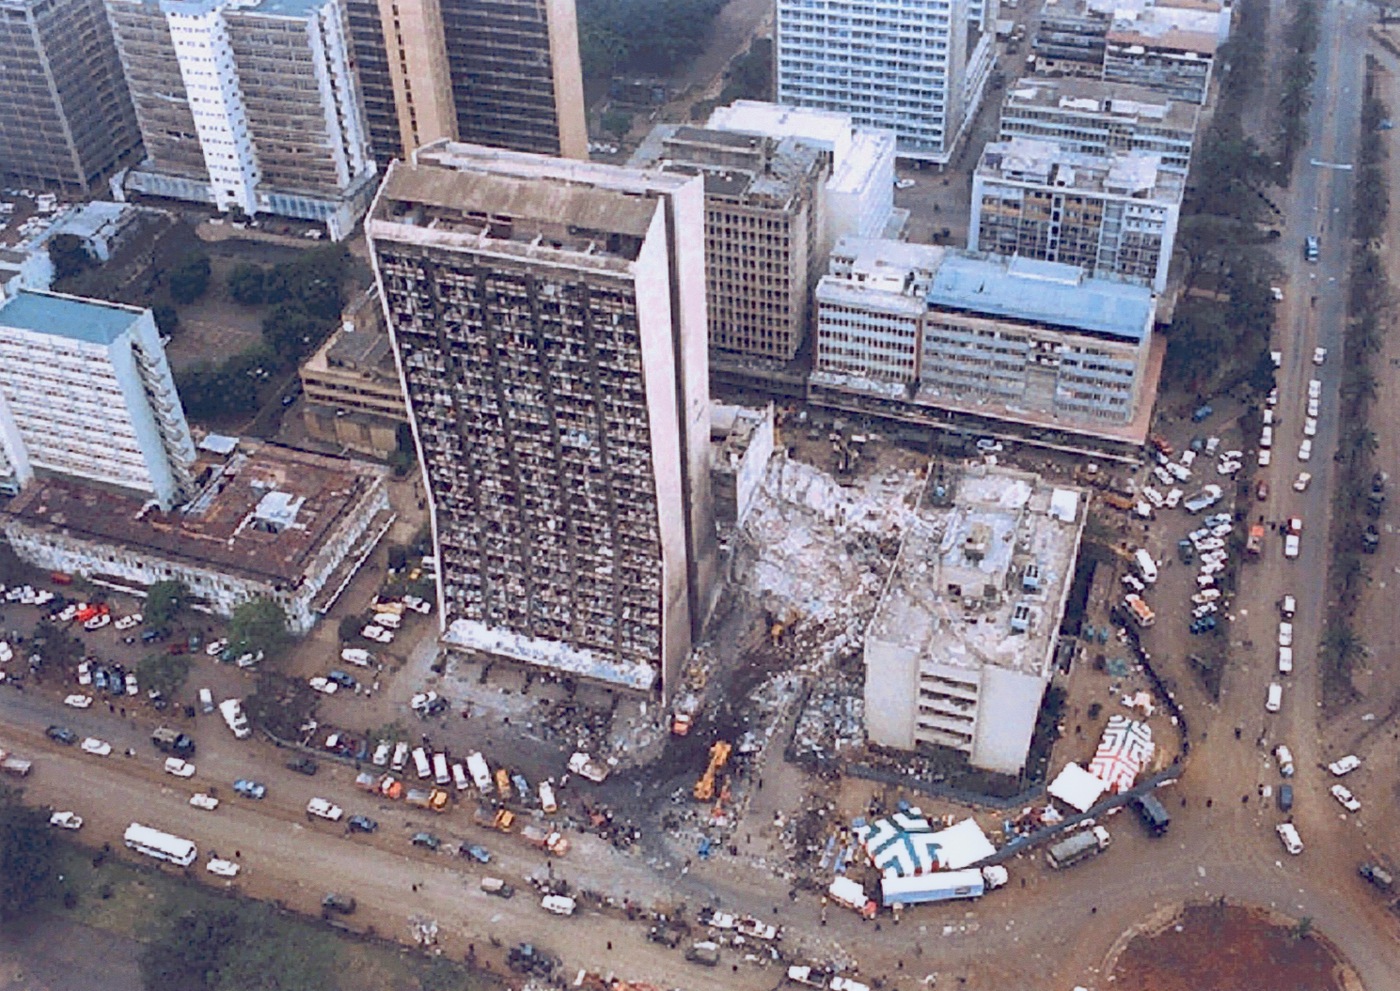 Bomb site of the attack on the U.S. Embassy in Nairobi, Africa, on August 7, 1998 by al Qaeda operatives. 